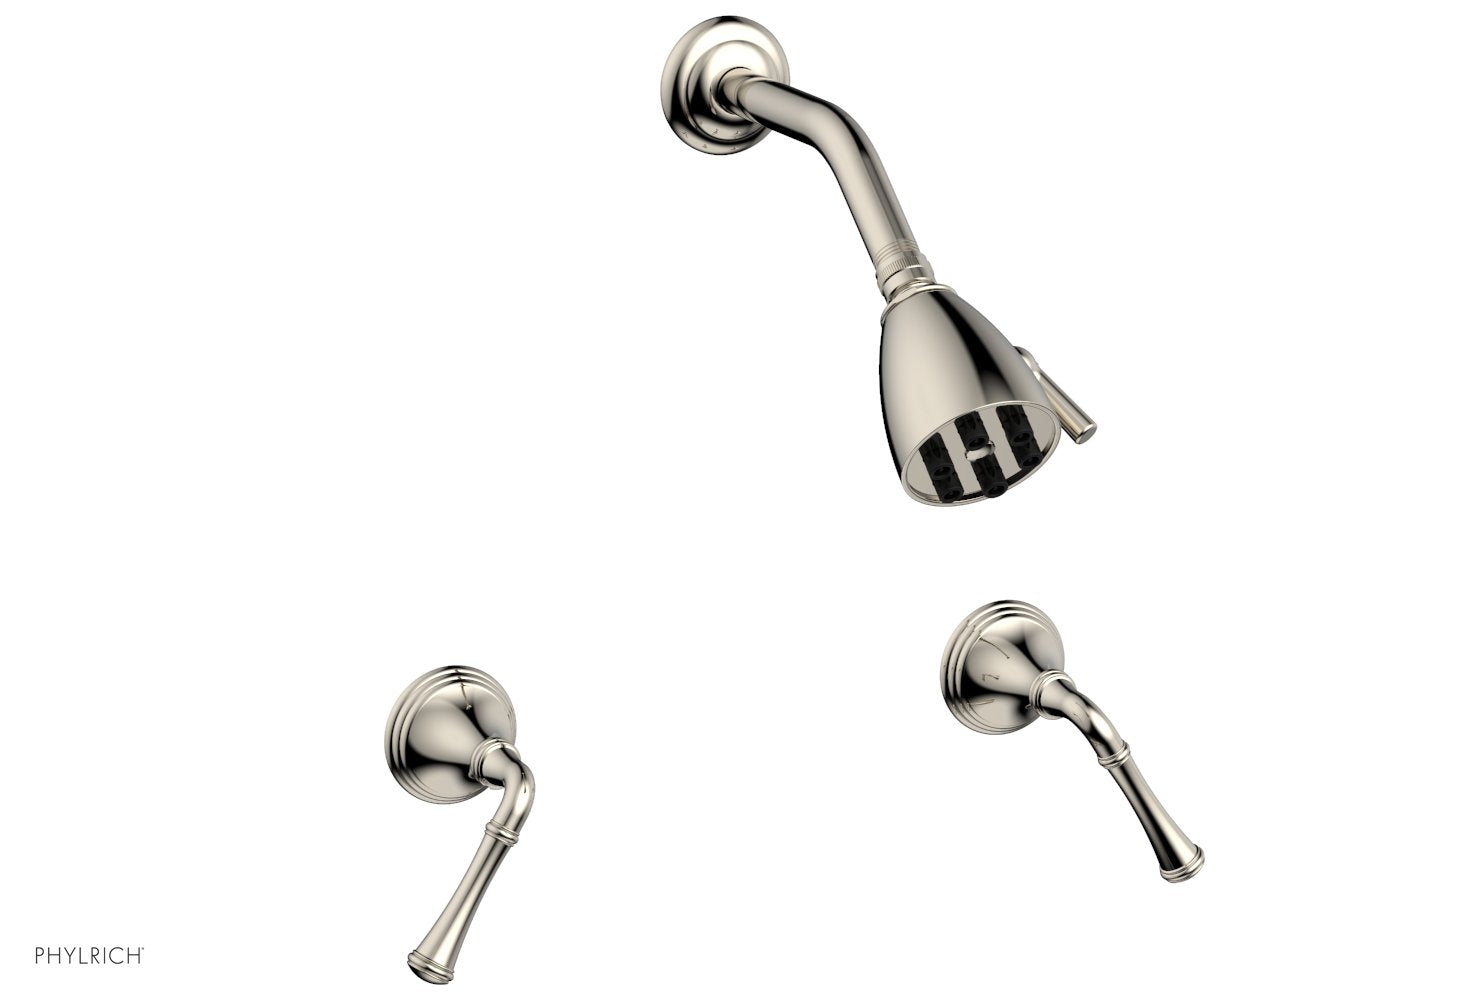 Phylrich 3RING Two Handle Shower Set